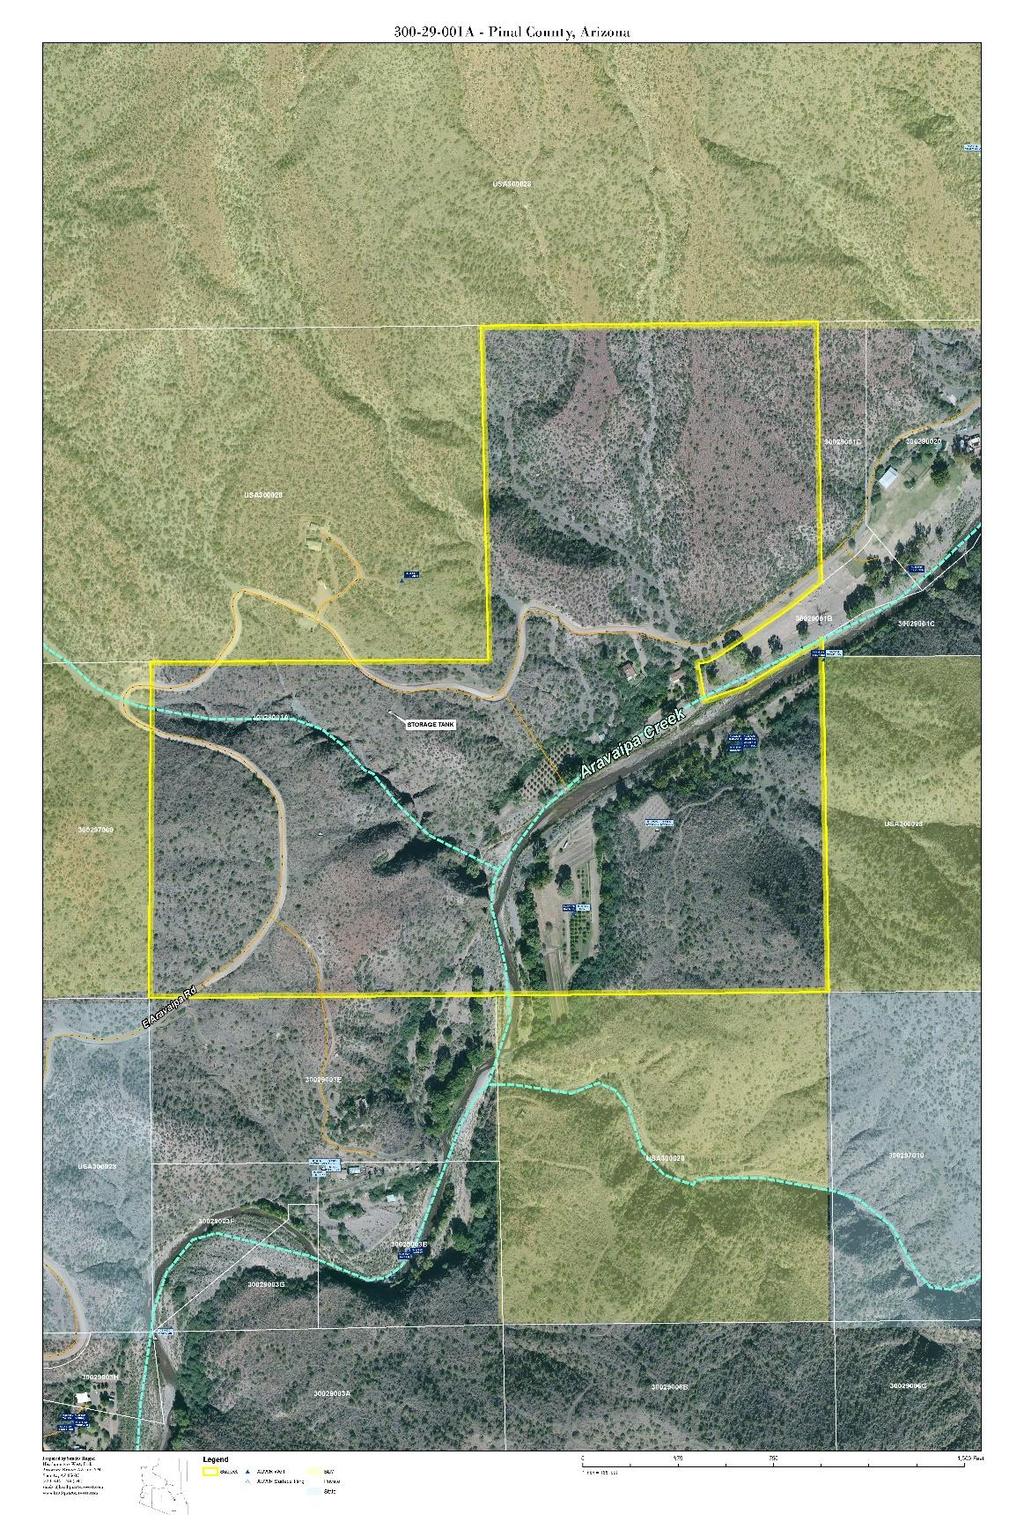 Aravaipa Canyon Ranch Aerial Map (Parcel Boundary Lines are Approximate) Parcel